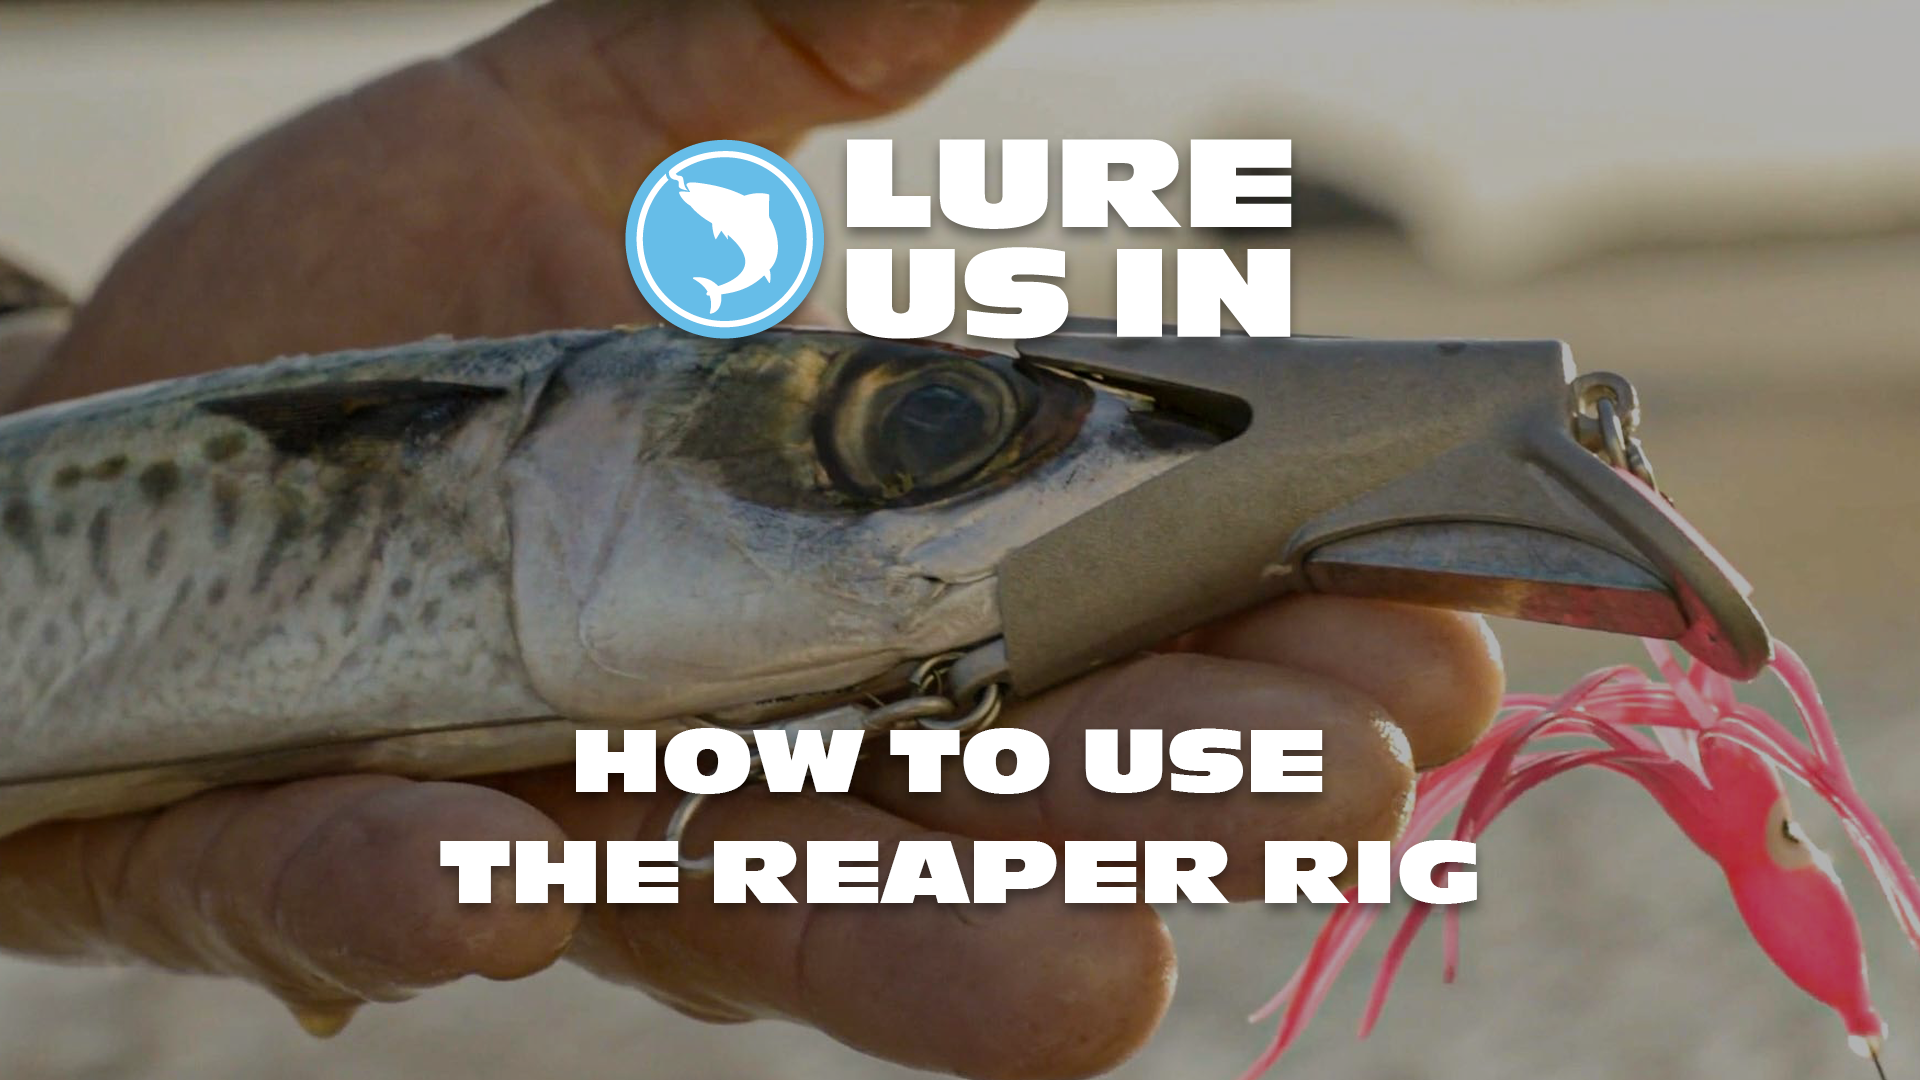 Load video: Watch // How to use the Reaper Rig Lure